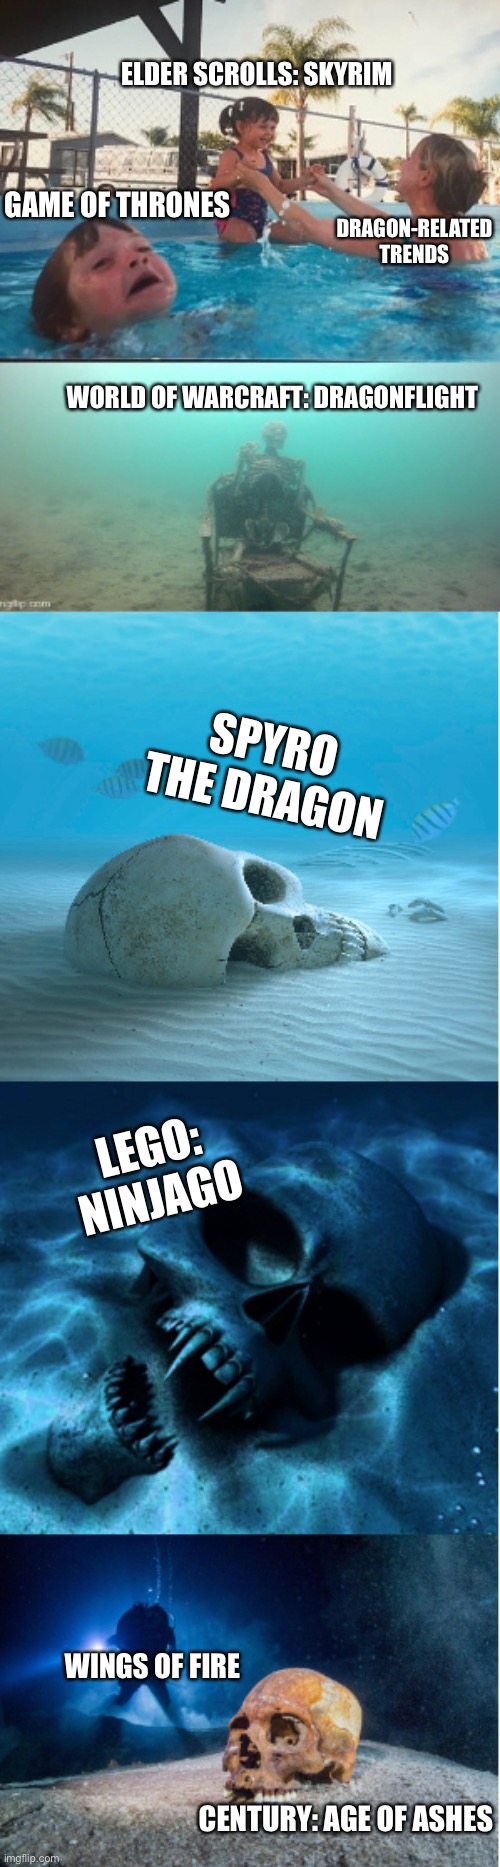 Credit to the people who told me about the games | ELDER SCROLLS: SKYRIM; DRAGON-RELATED TRENDS; GAME OF THRONES; WORLD OF WARCRAFT: DRAGONFLIGHT; SPYRO THE DRAGON; LEGO: NINJAGO; WINGS OF FIRE; CENTURY: AGE OF ASHES | image tagged in mom ignoring drowning kid extended,relatable,memes,forgot,trending | made w/ Imgflip meme maker